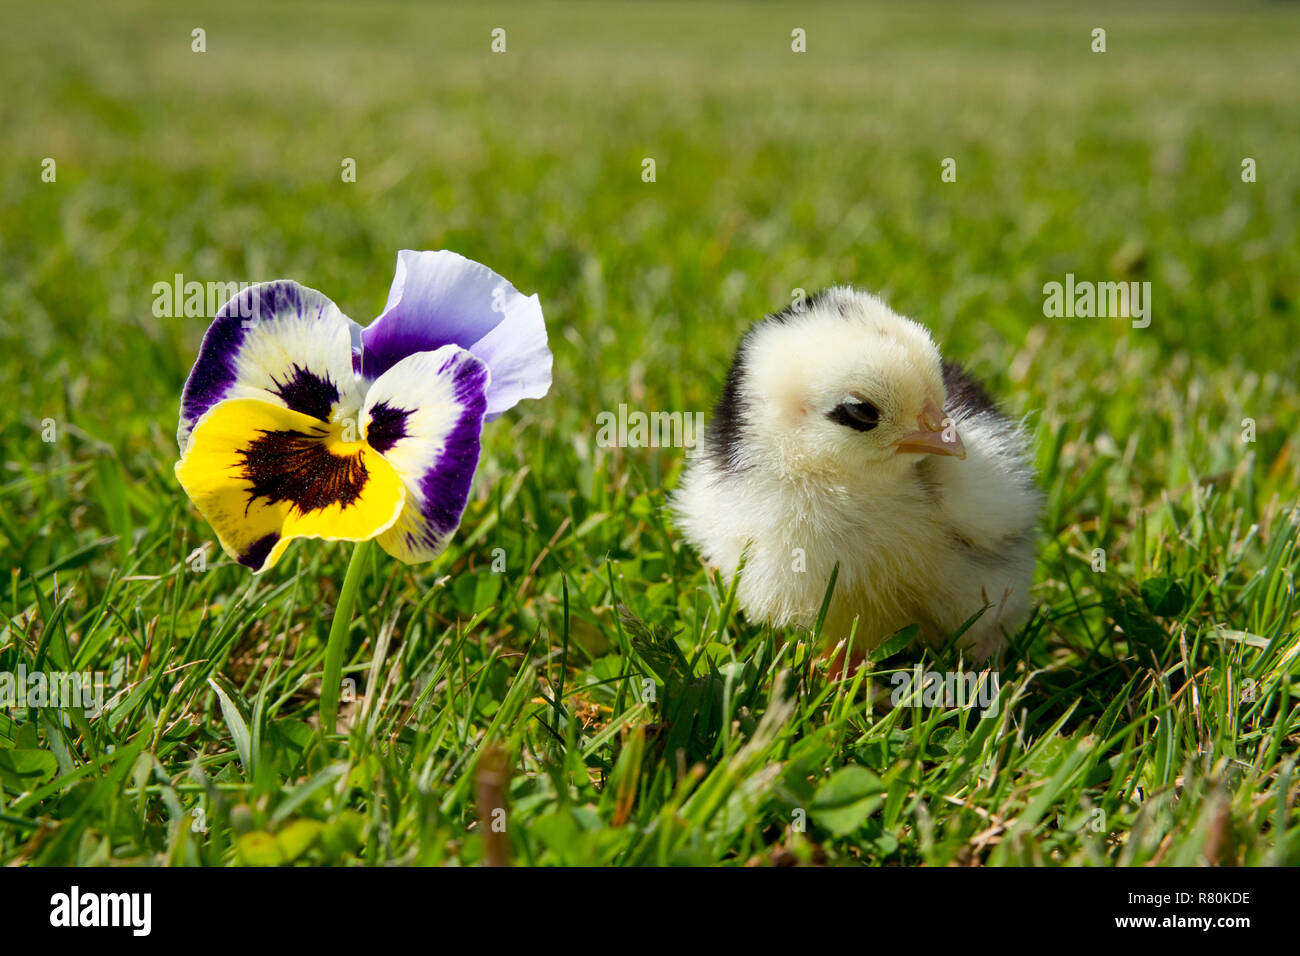 Domestic chicken, Orpington chicken. Chick standing in grass next to Pansy flower. Germany Stock Photo